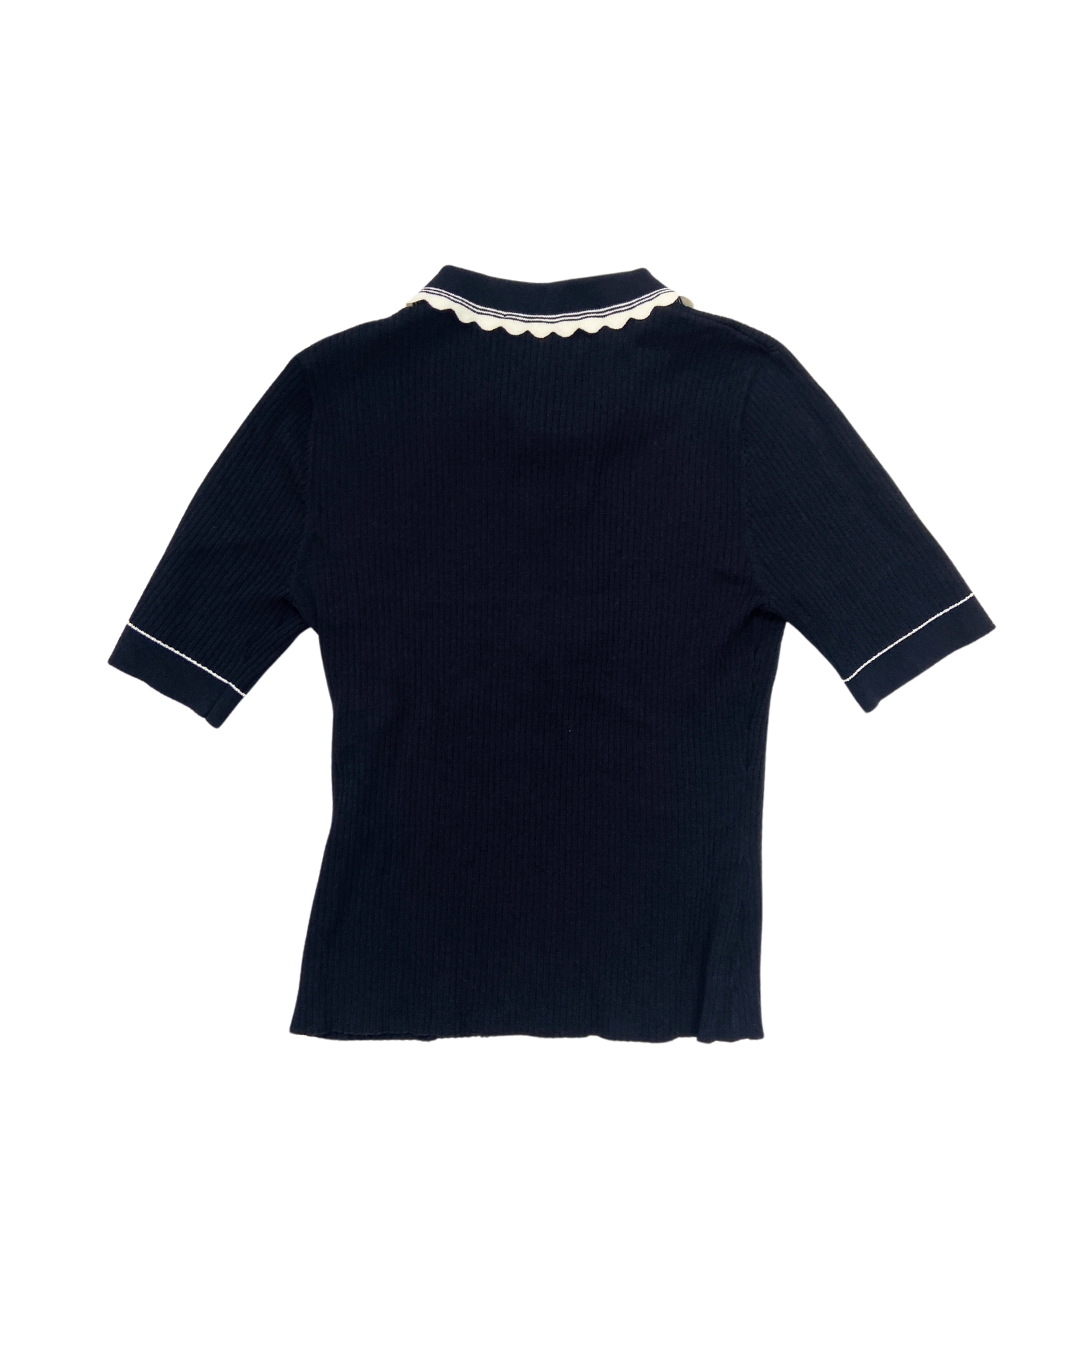 LK Bennet Navy Blue Knit Top with Contrasting Trim